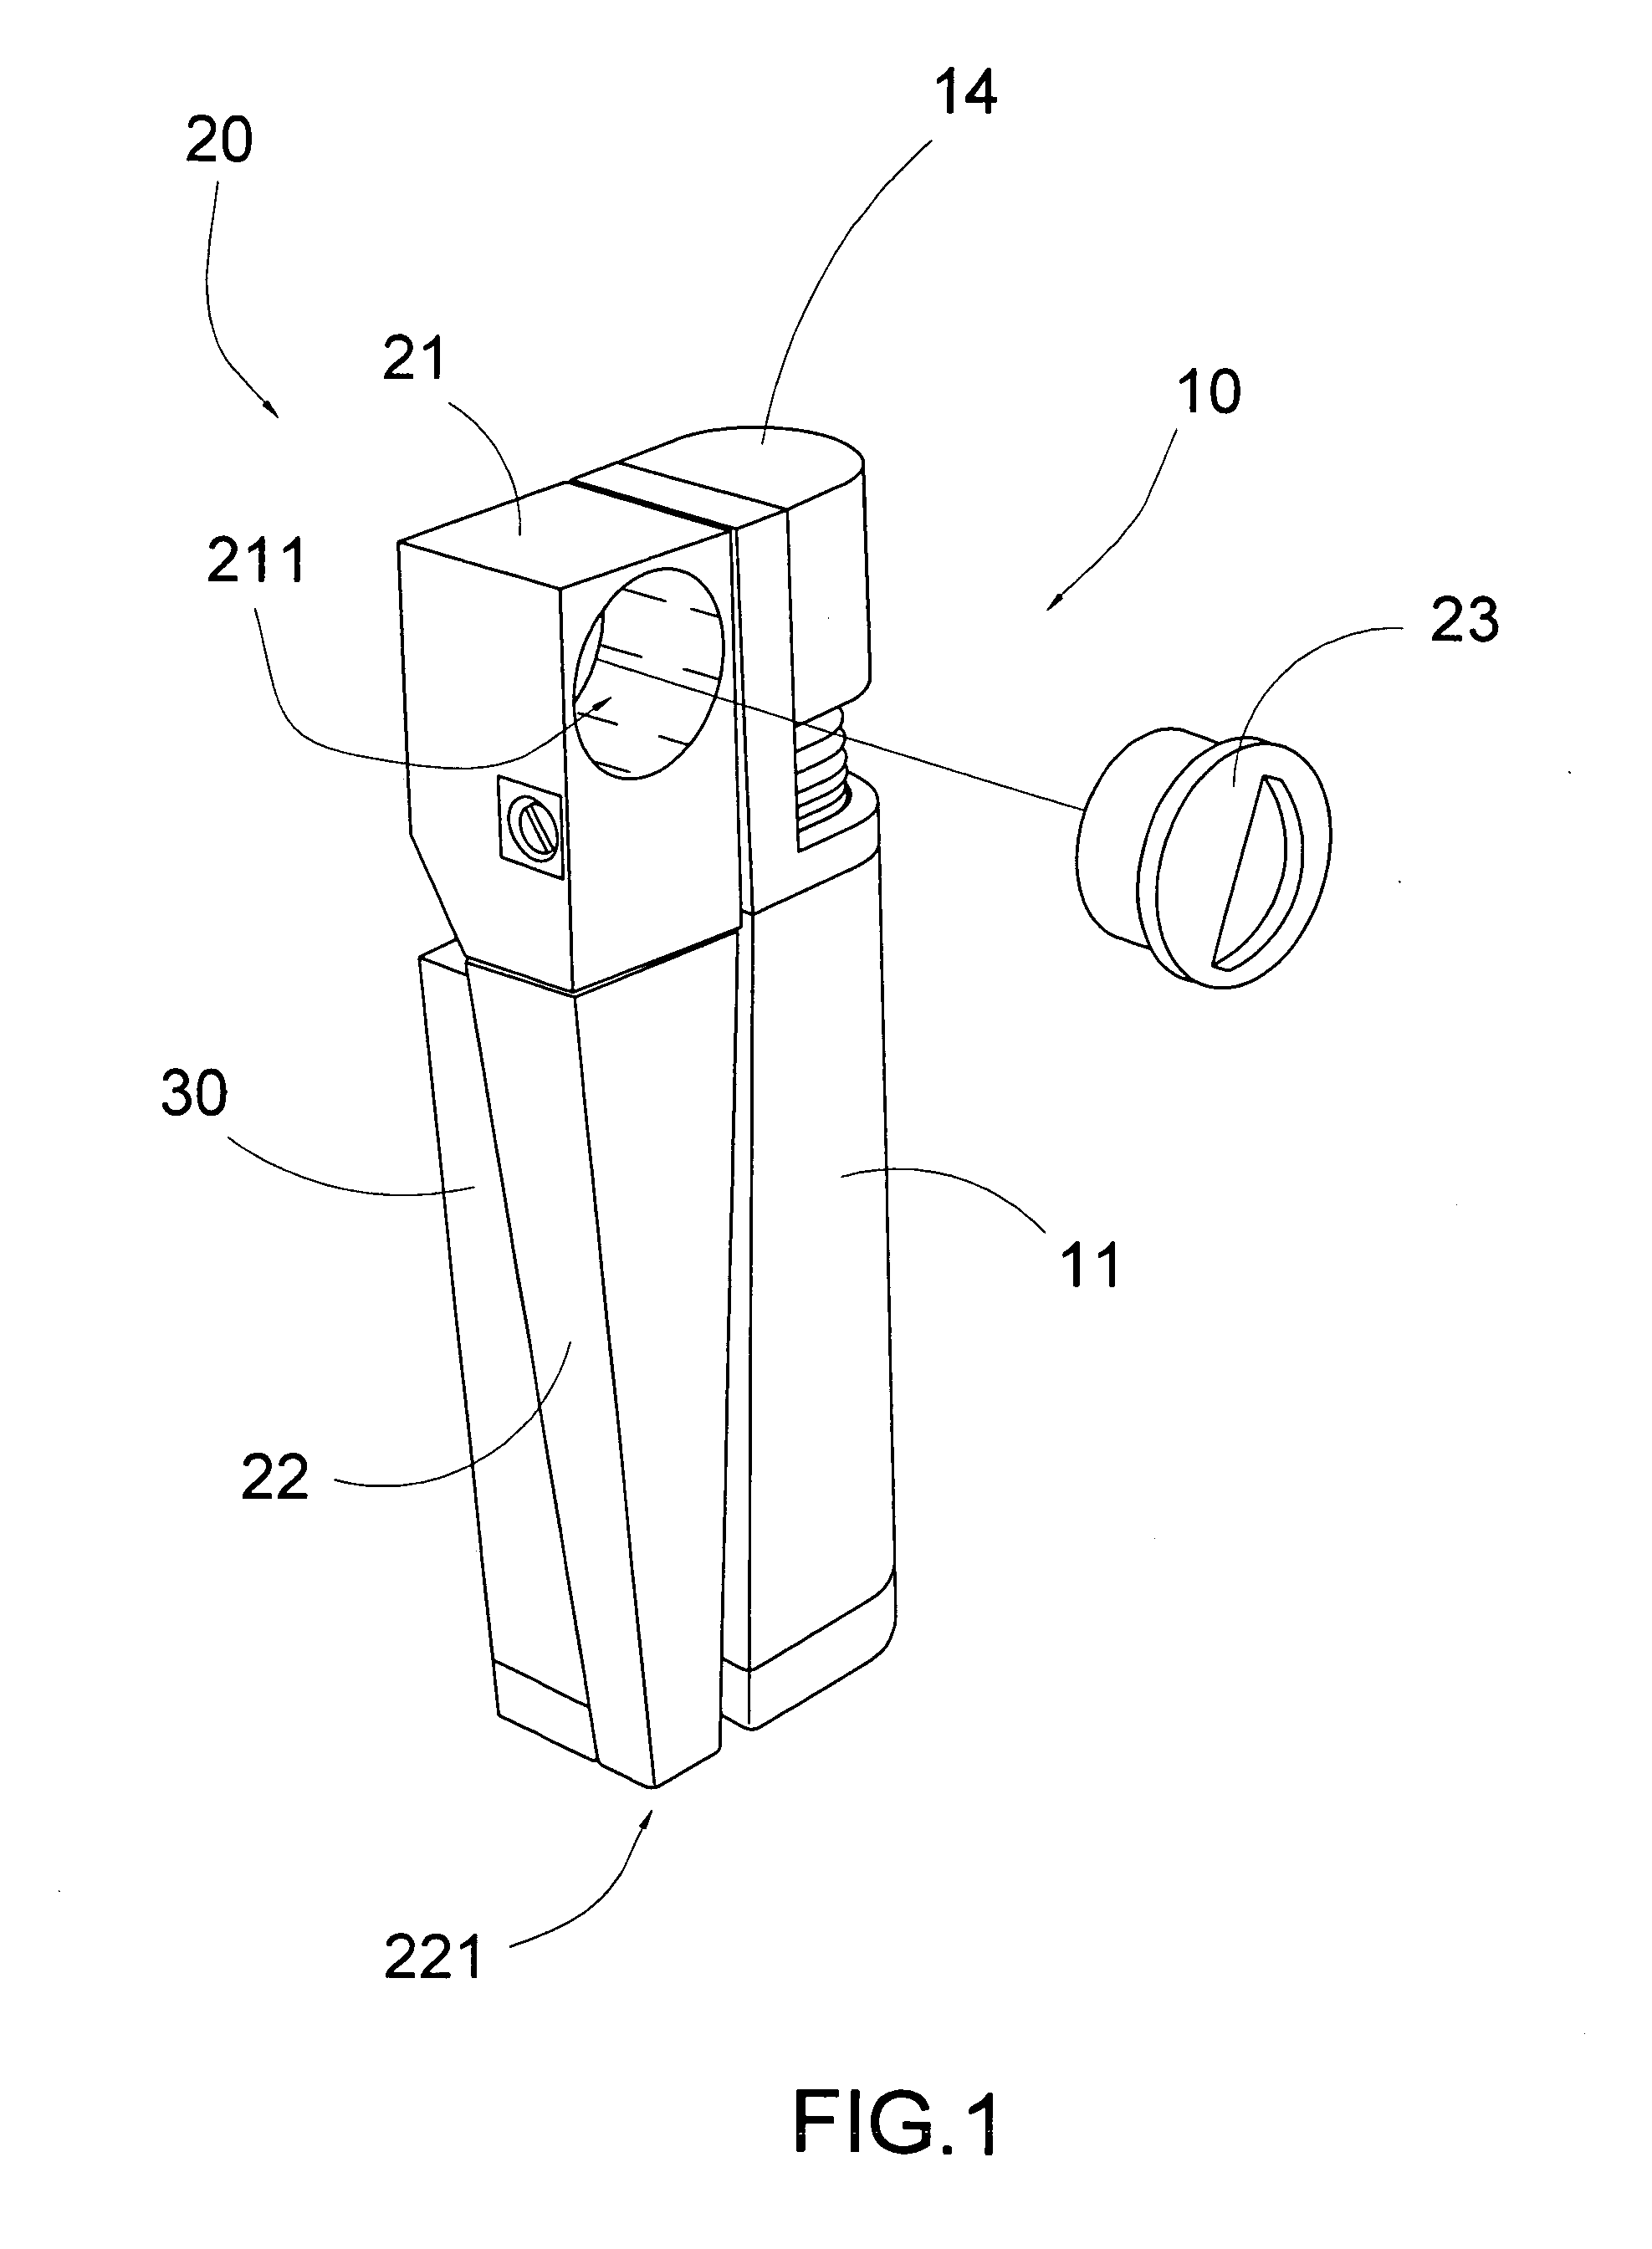 Combination smoking device and lighter